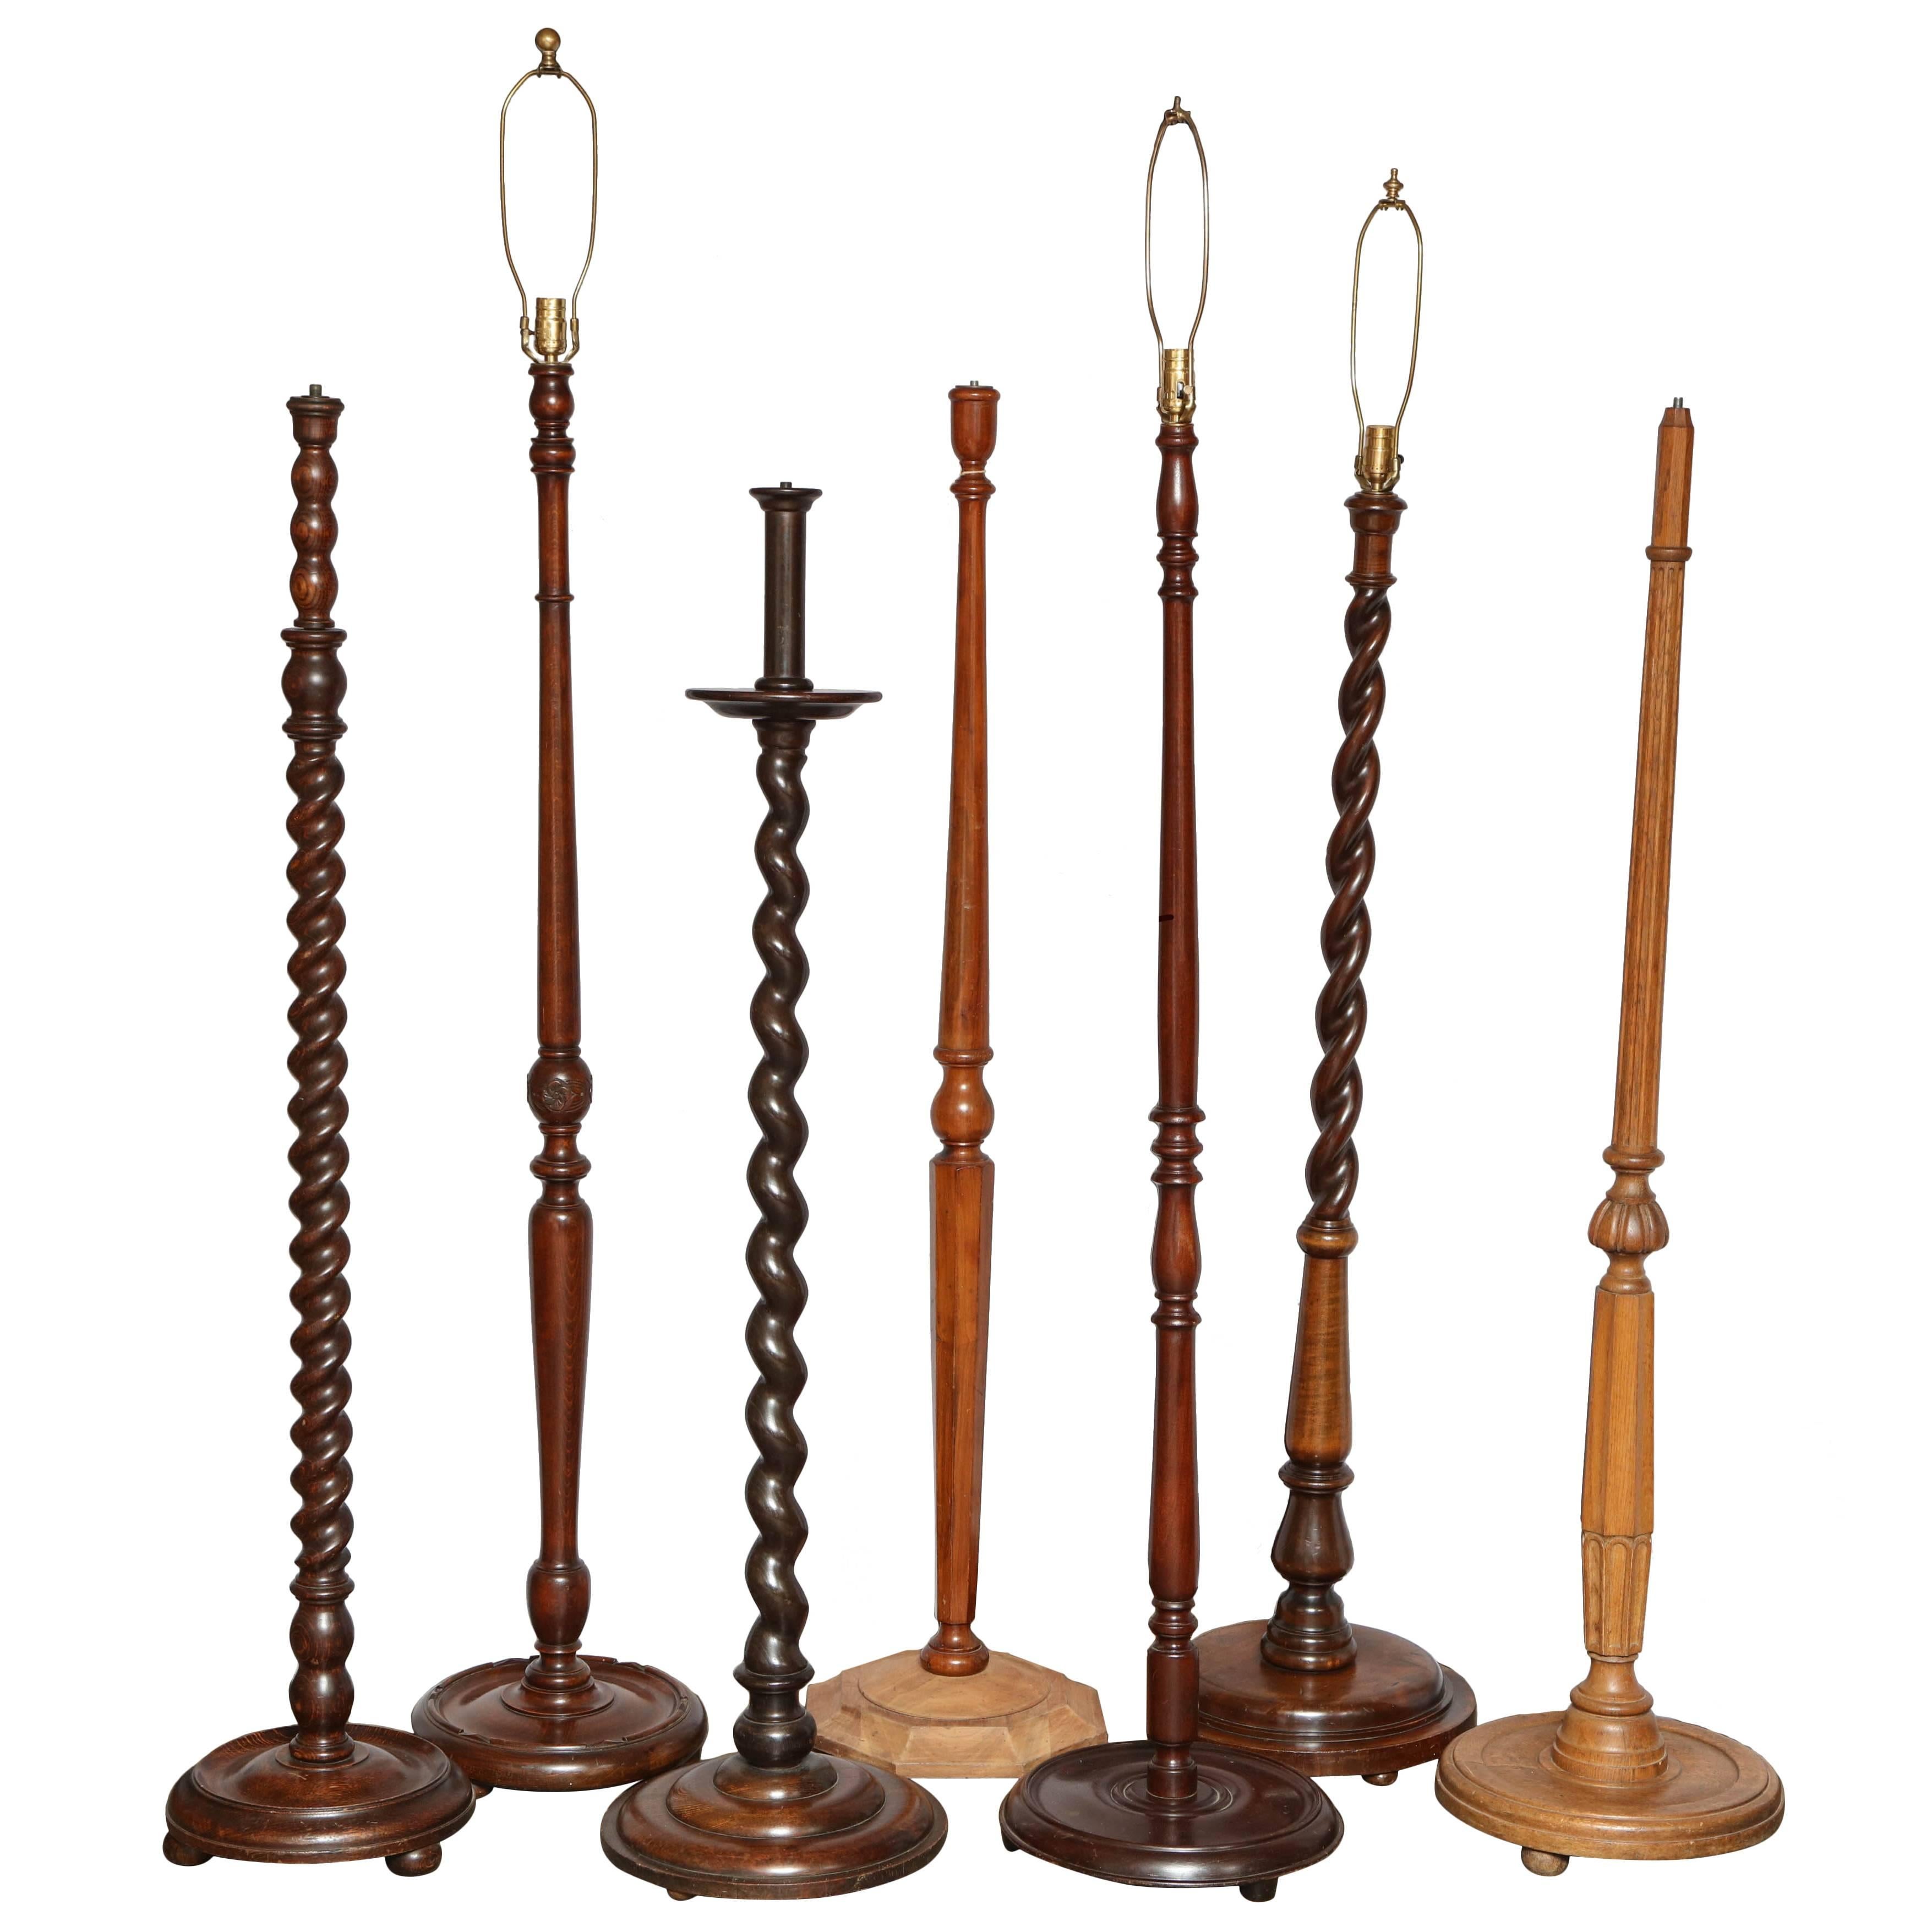 Collection of Antique English Floor Lamps